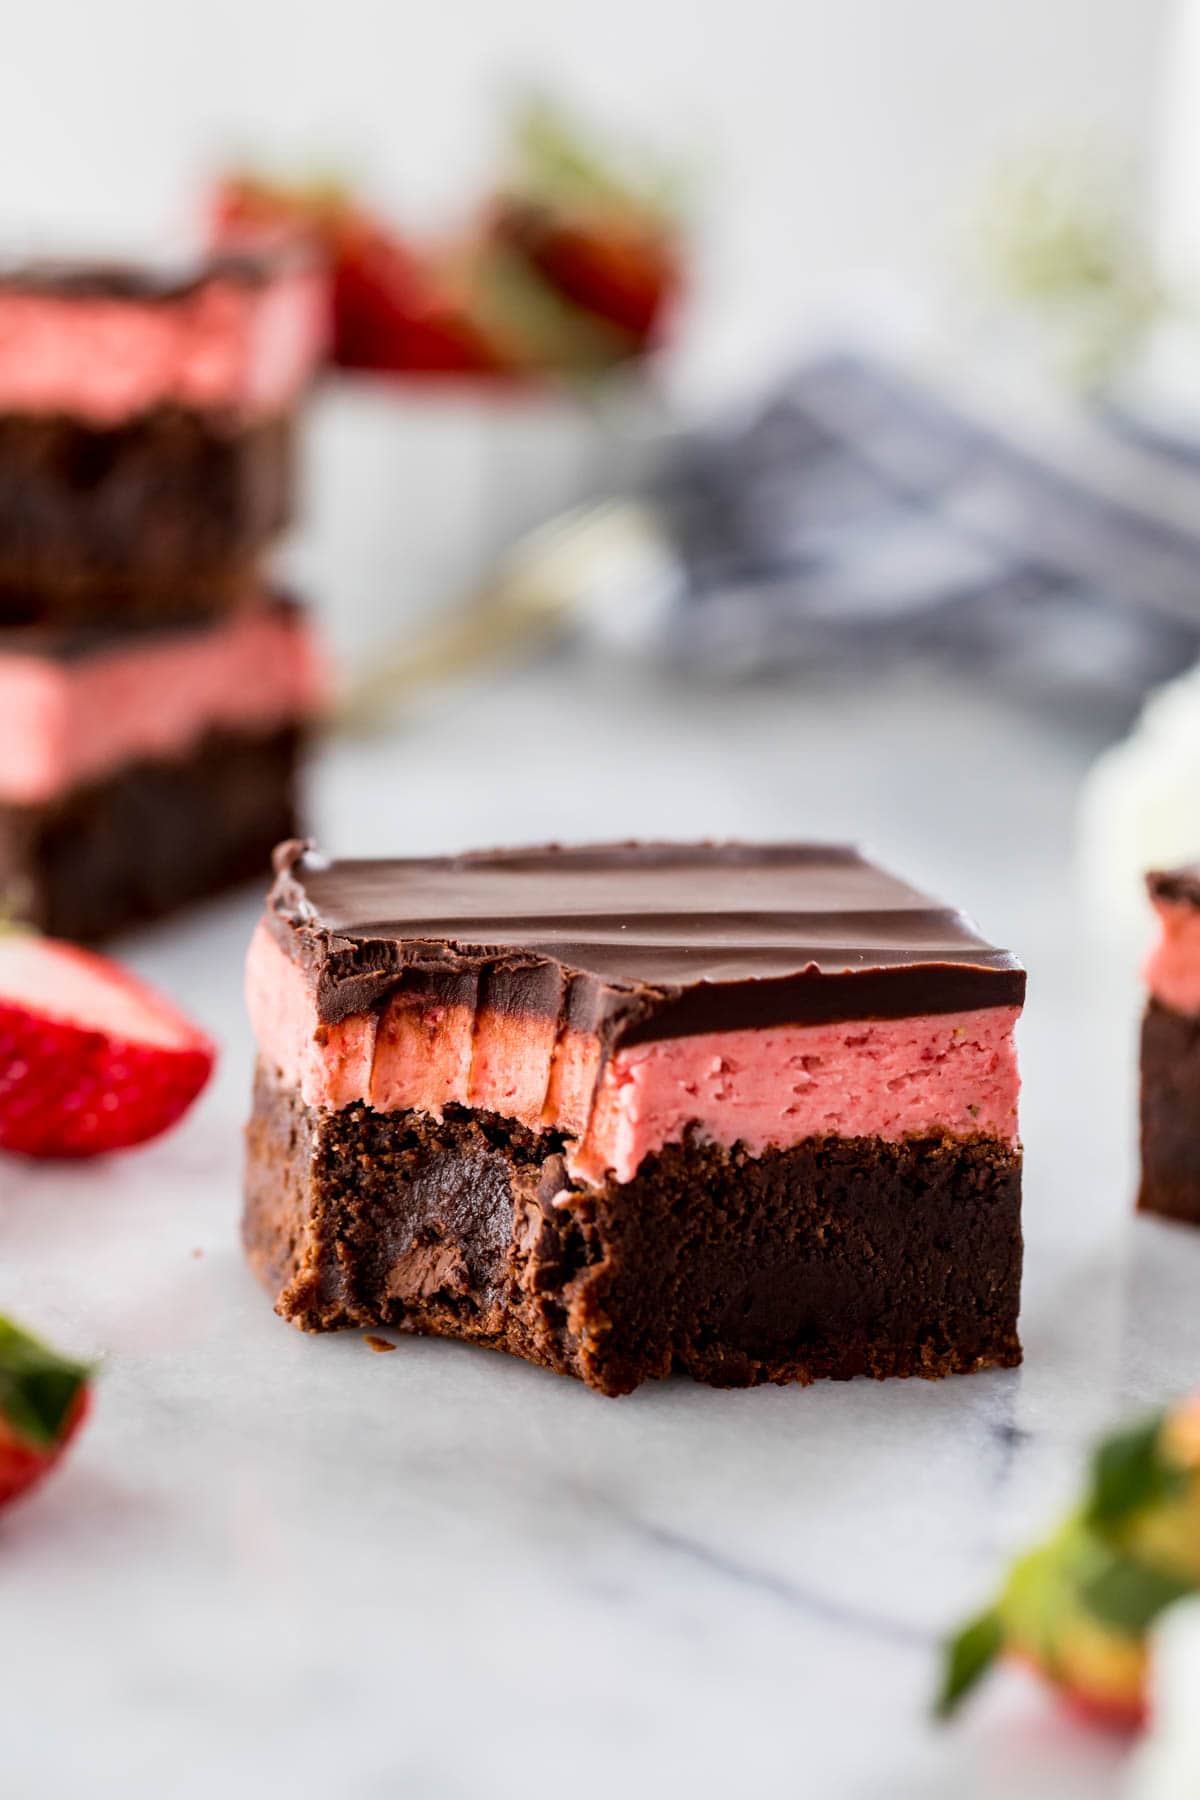 thick, square-cut brownie layered with pink strawberry frosting and chocolate ganache with a bite missing from one corner